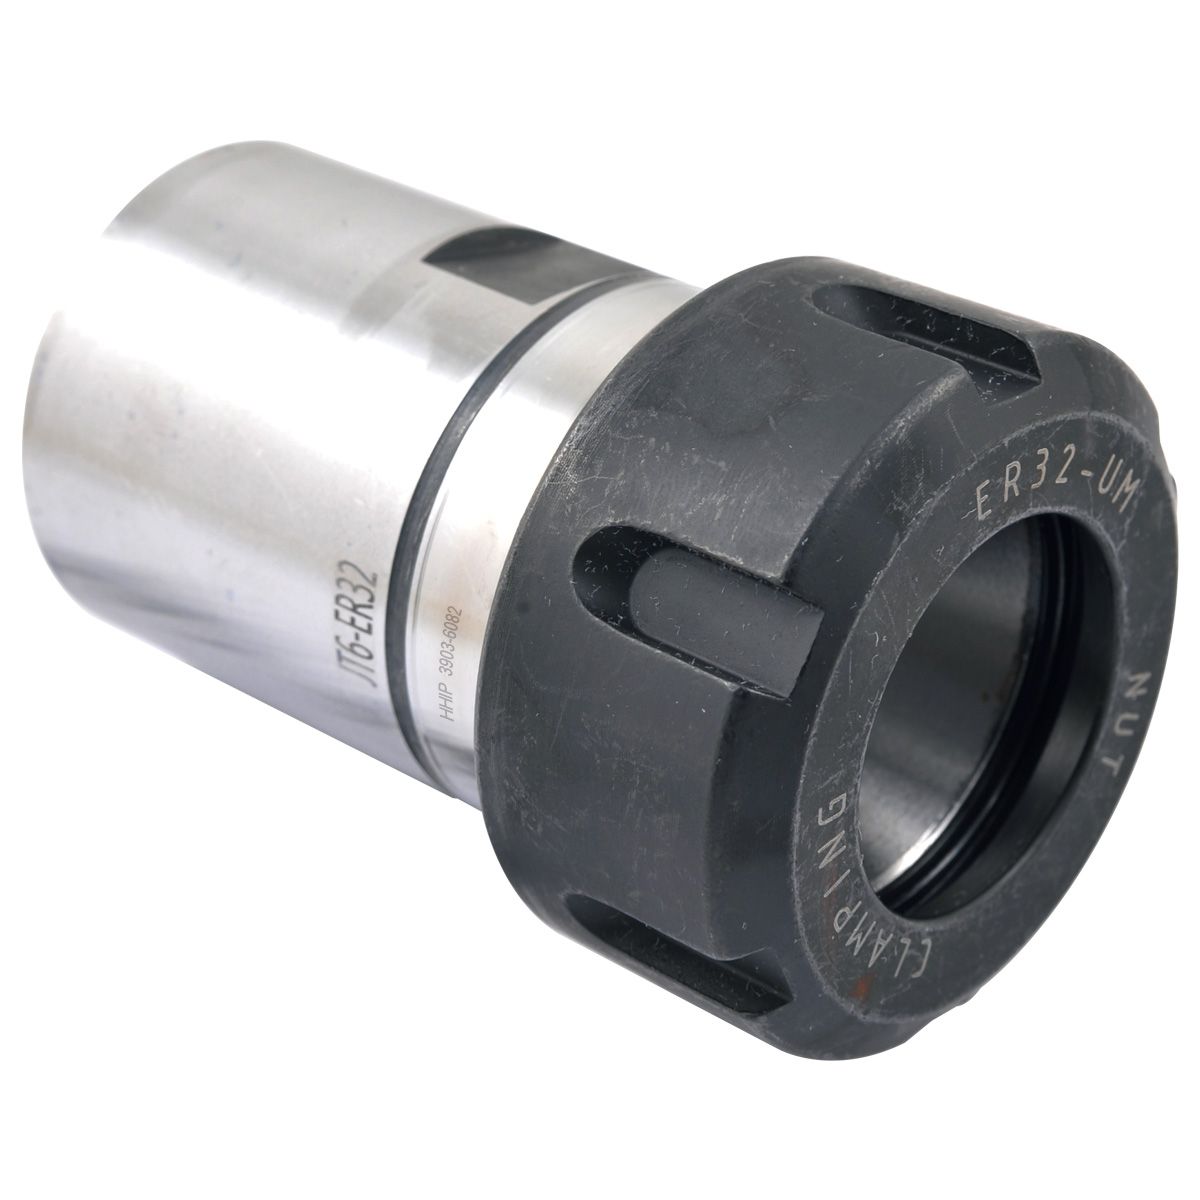 ER32 COLLET & DRILL CHUCK WITH JT6 SLEEVE (3903-6082)